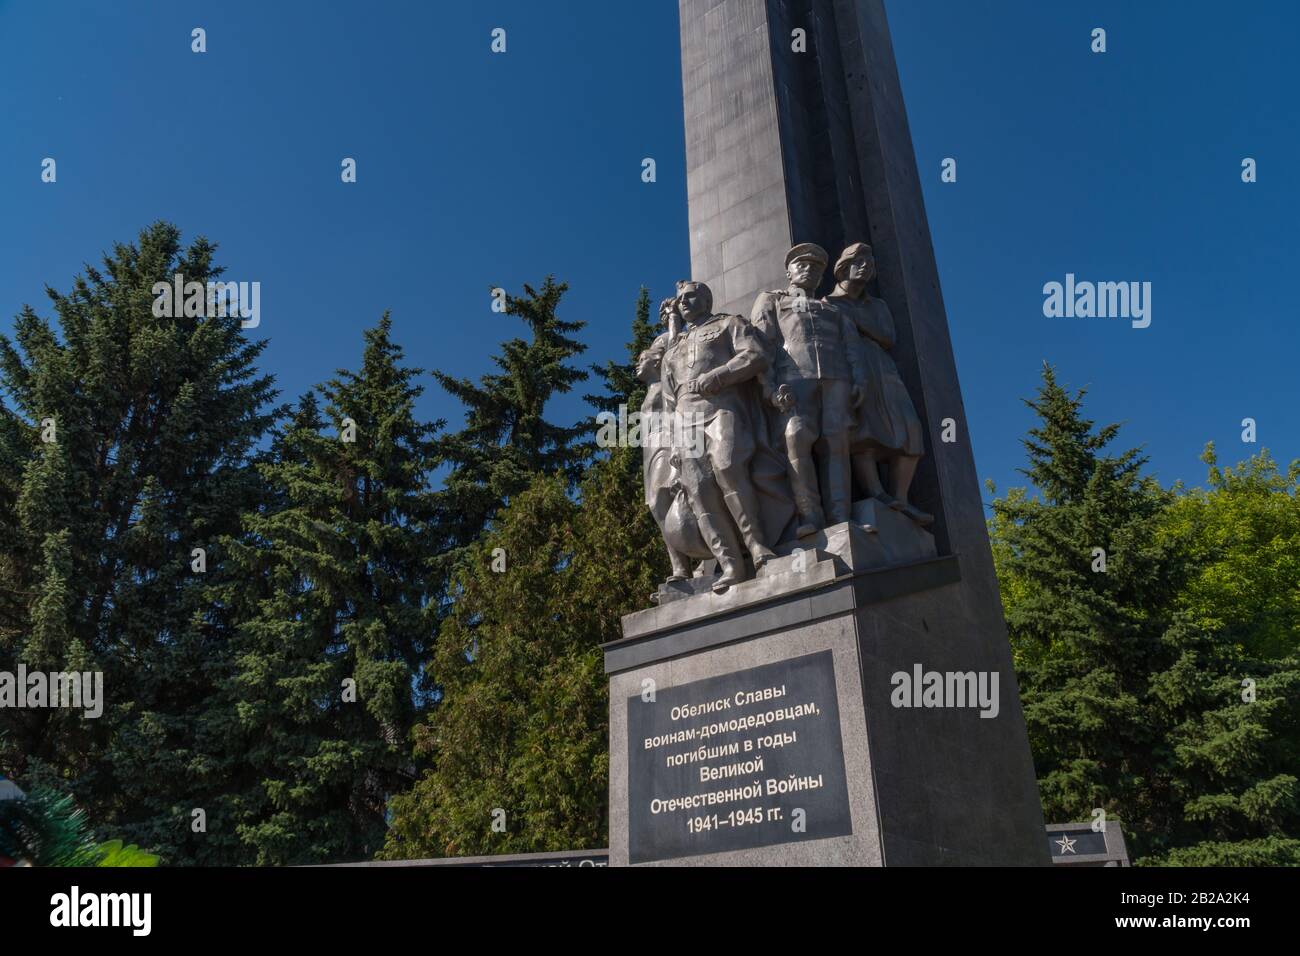 11 June 2018. Russia. The City Of Domodedovo. Day. Obelisk of Glory to soldiers-Domodedovo soldiers who died during the World War two. Against the sky Stock Photo